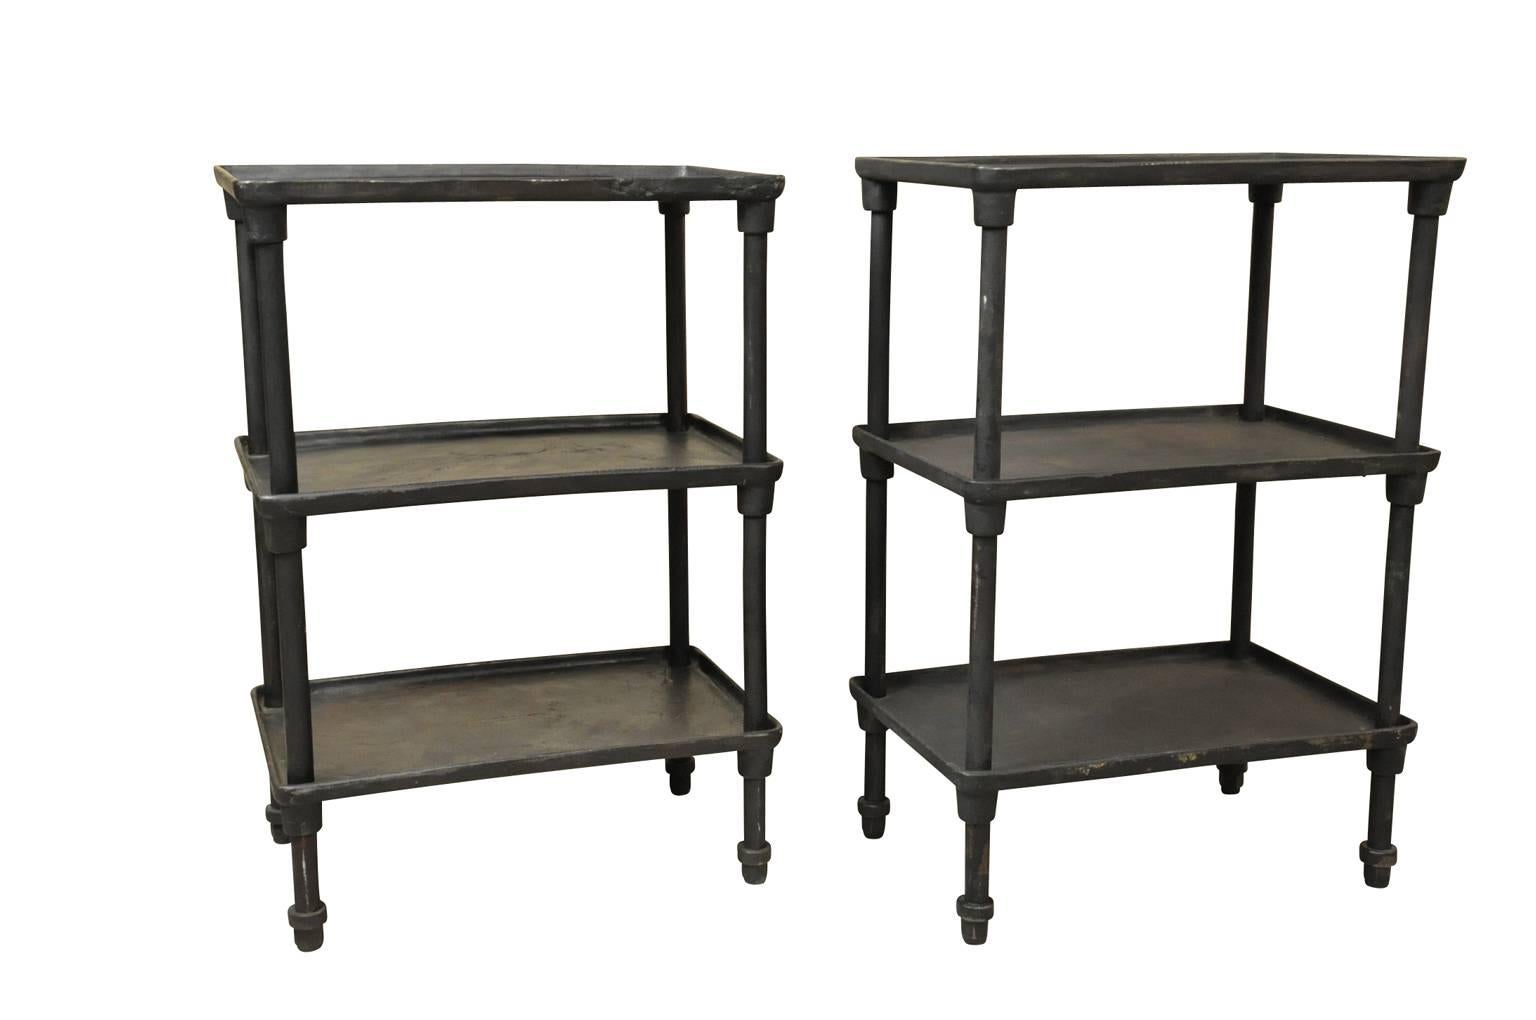 A very handsome pair of 19th century French Industrial side tables - end tables in substantial cast iron. Beautifully cast with a great finish. Wonderful as bedside tables - or in any living area.